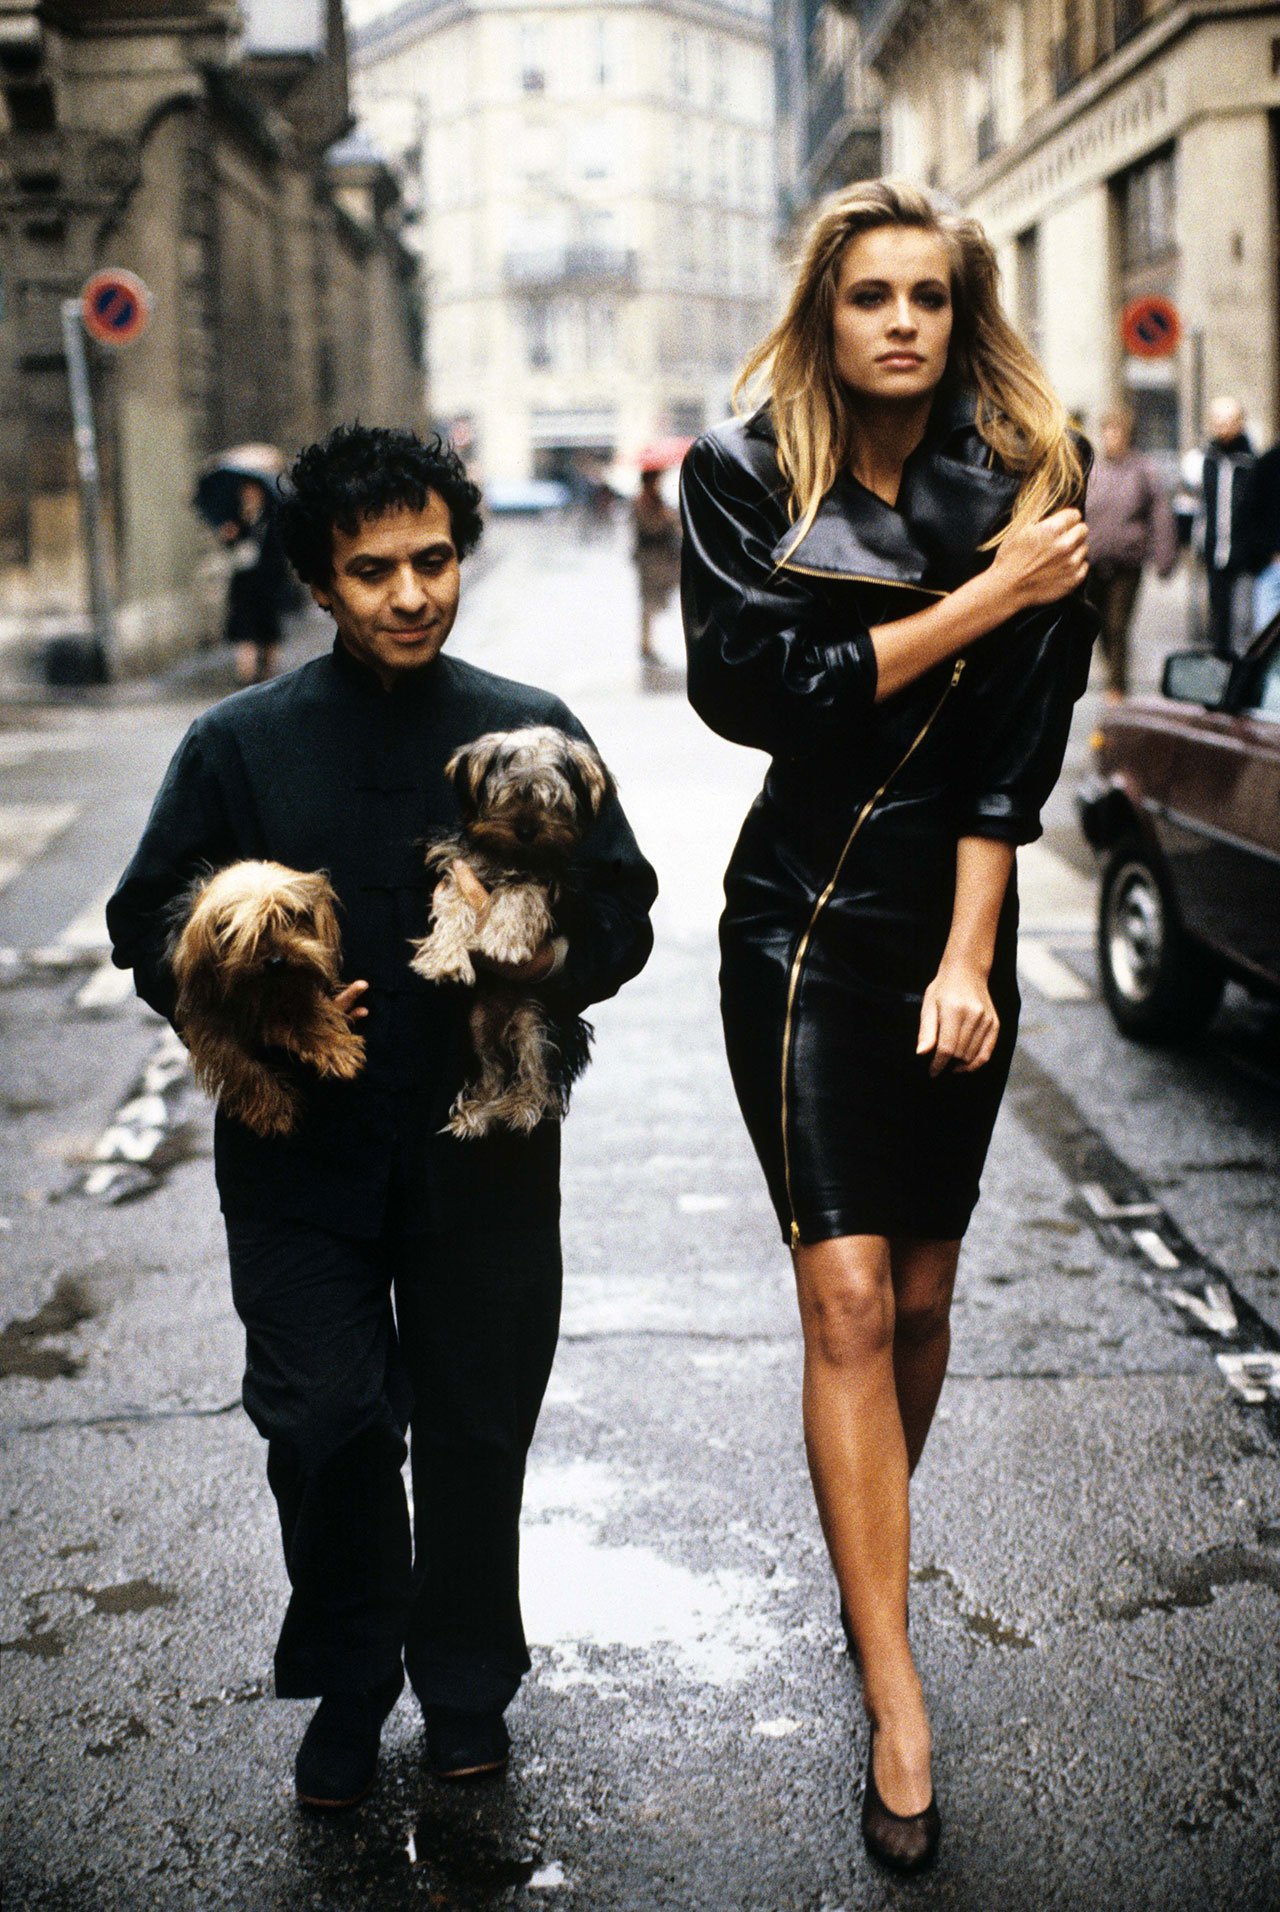 Fashion designer Azzedine Alaia holding his two Yorkshire terriers, Patapouf and Wabo, walking in Paris street with model Frederique who wears one of his creations, a black leather zippered dress, 1986. Photo by Arthur Elgort.